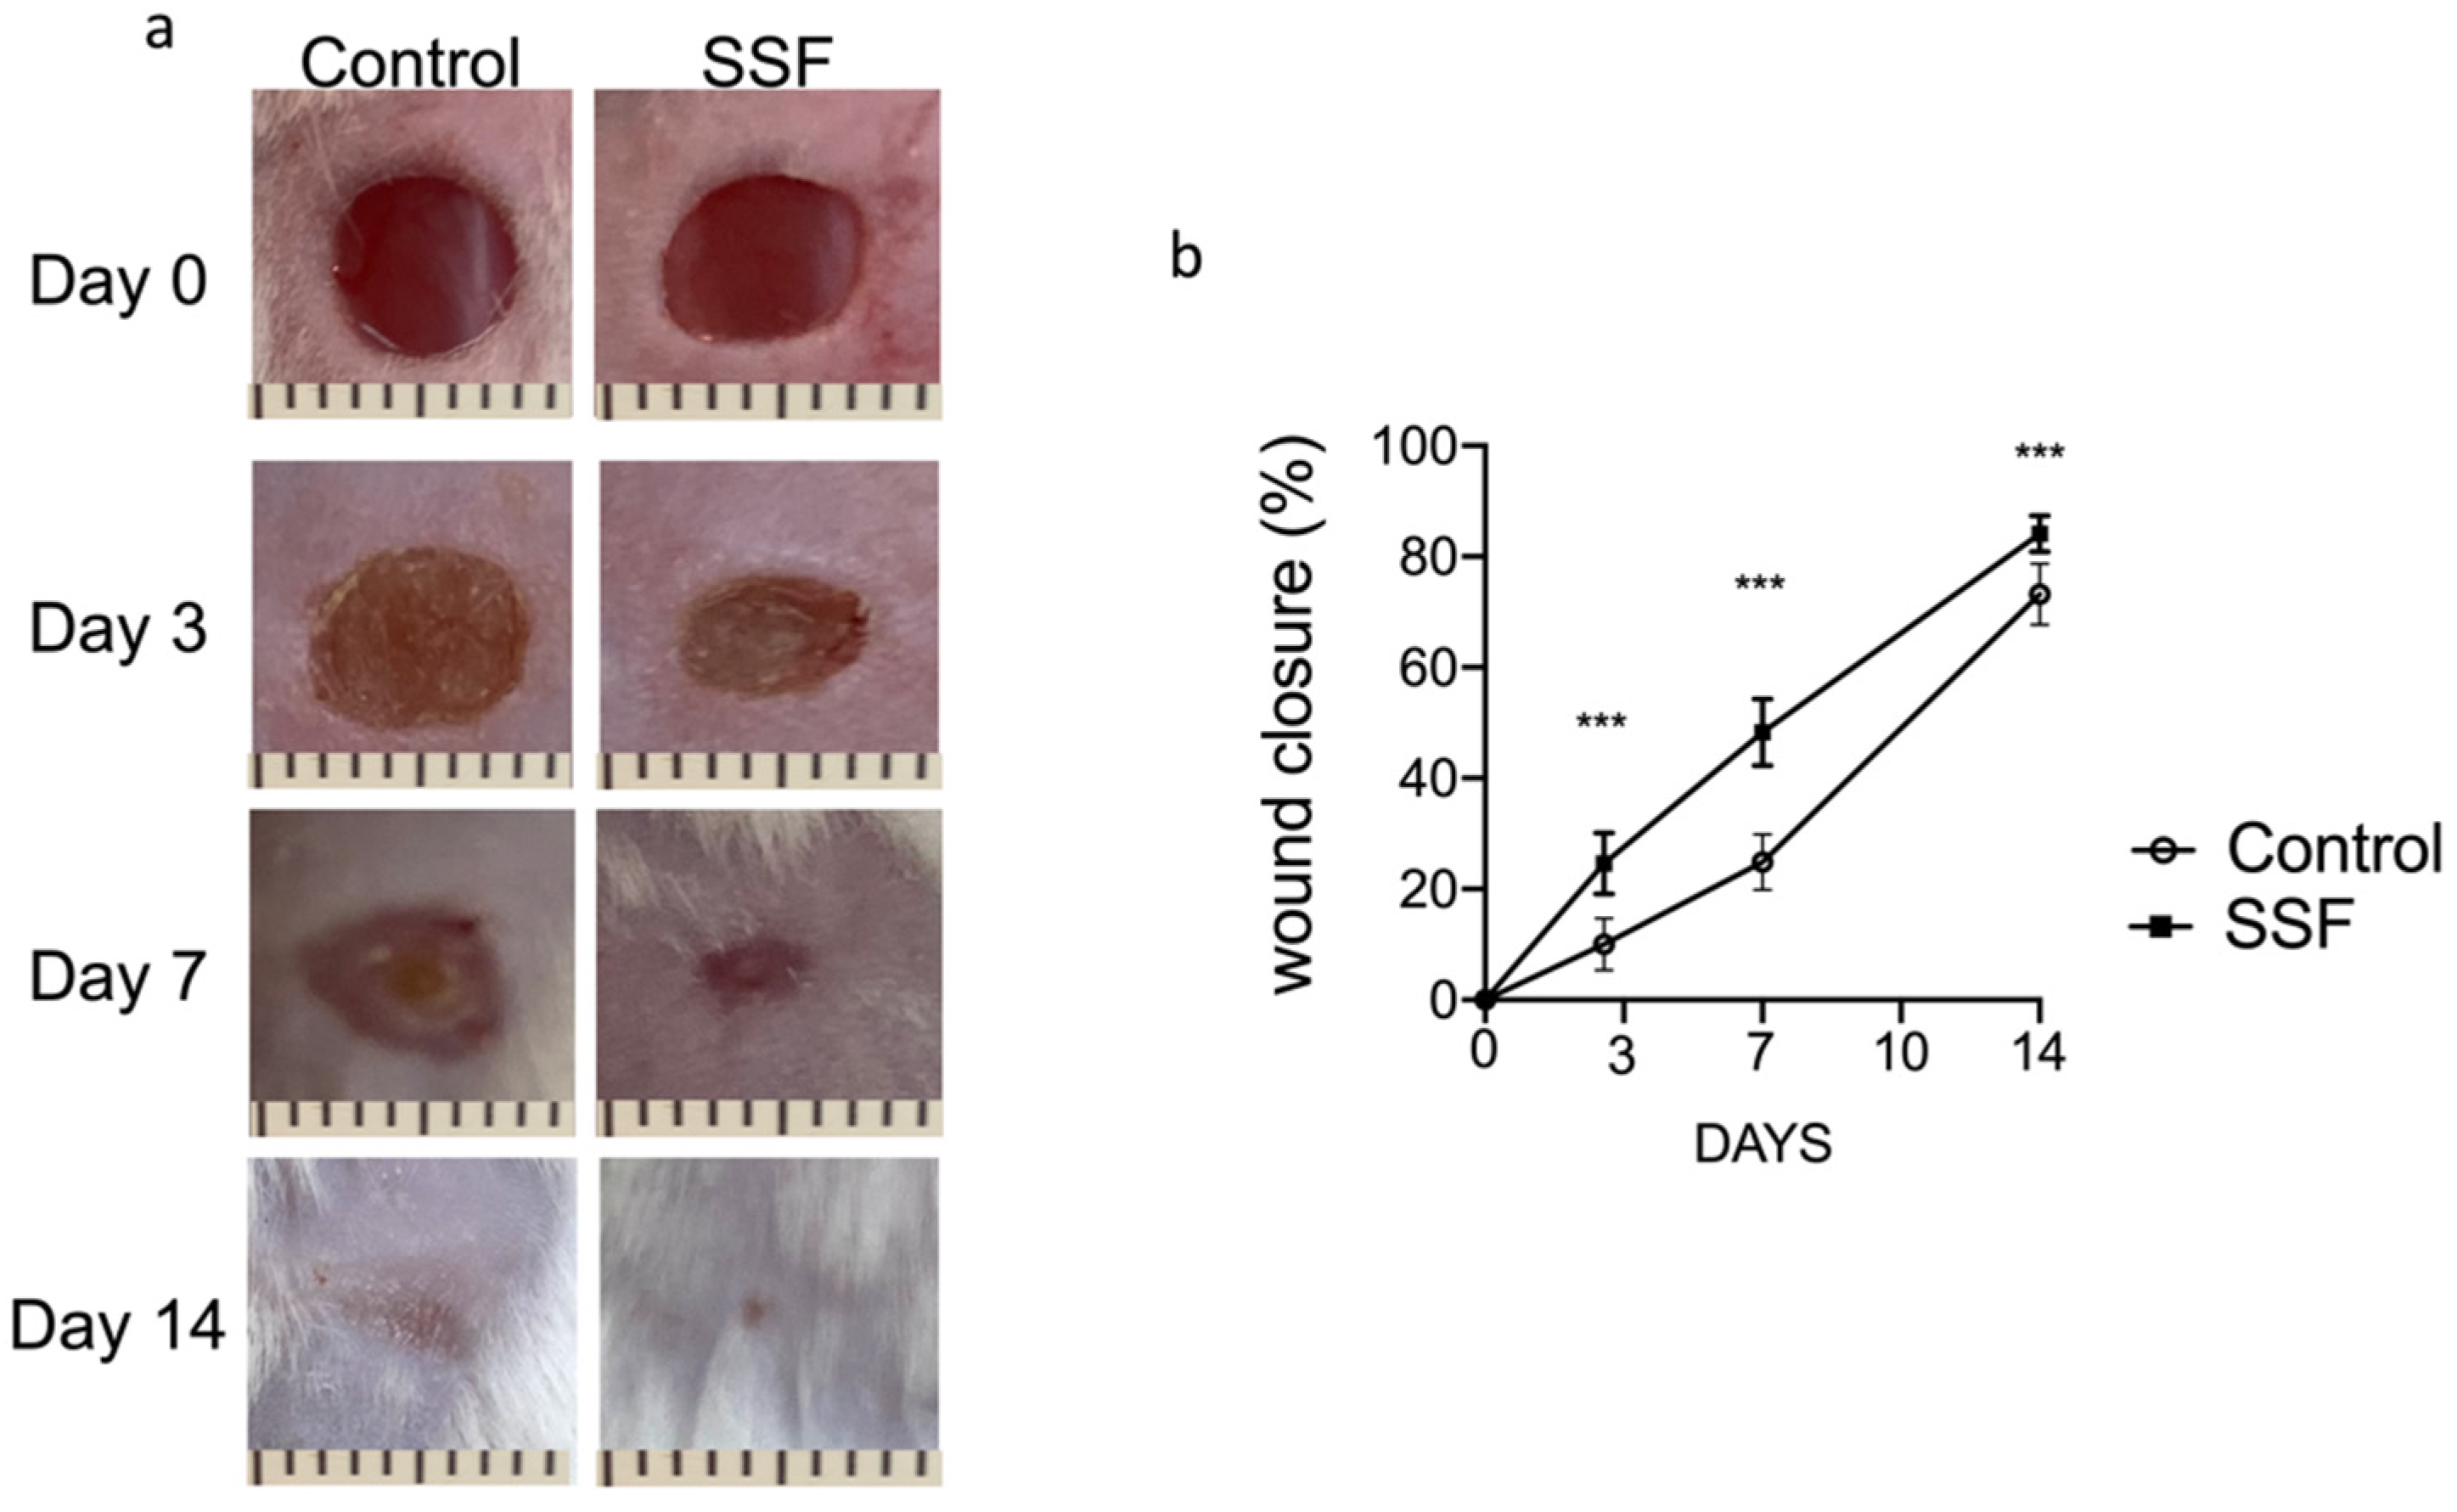 Veterinary Sciences | Free Full-Text | Protective Effect of Snail Secretion in an Experimental Model of Excisional Wounds in Mice | HTML